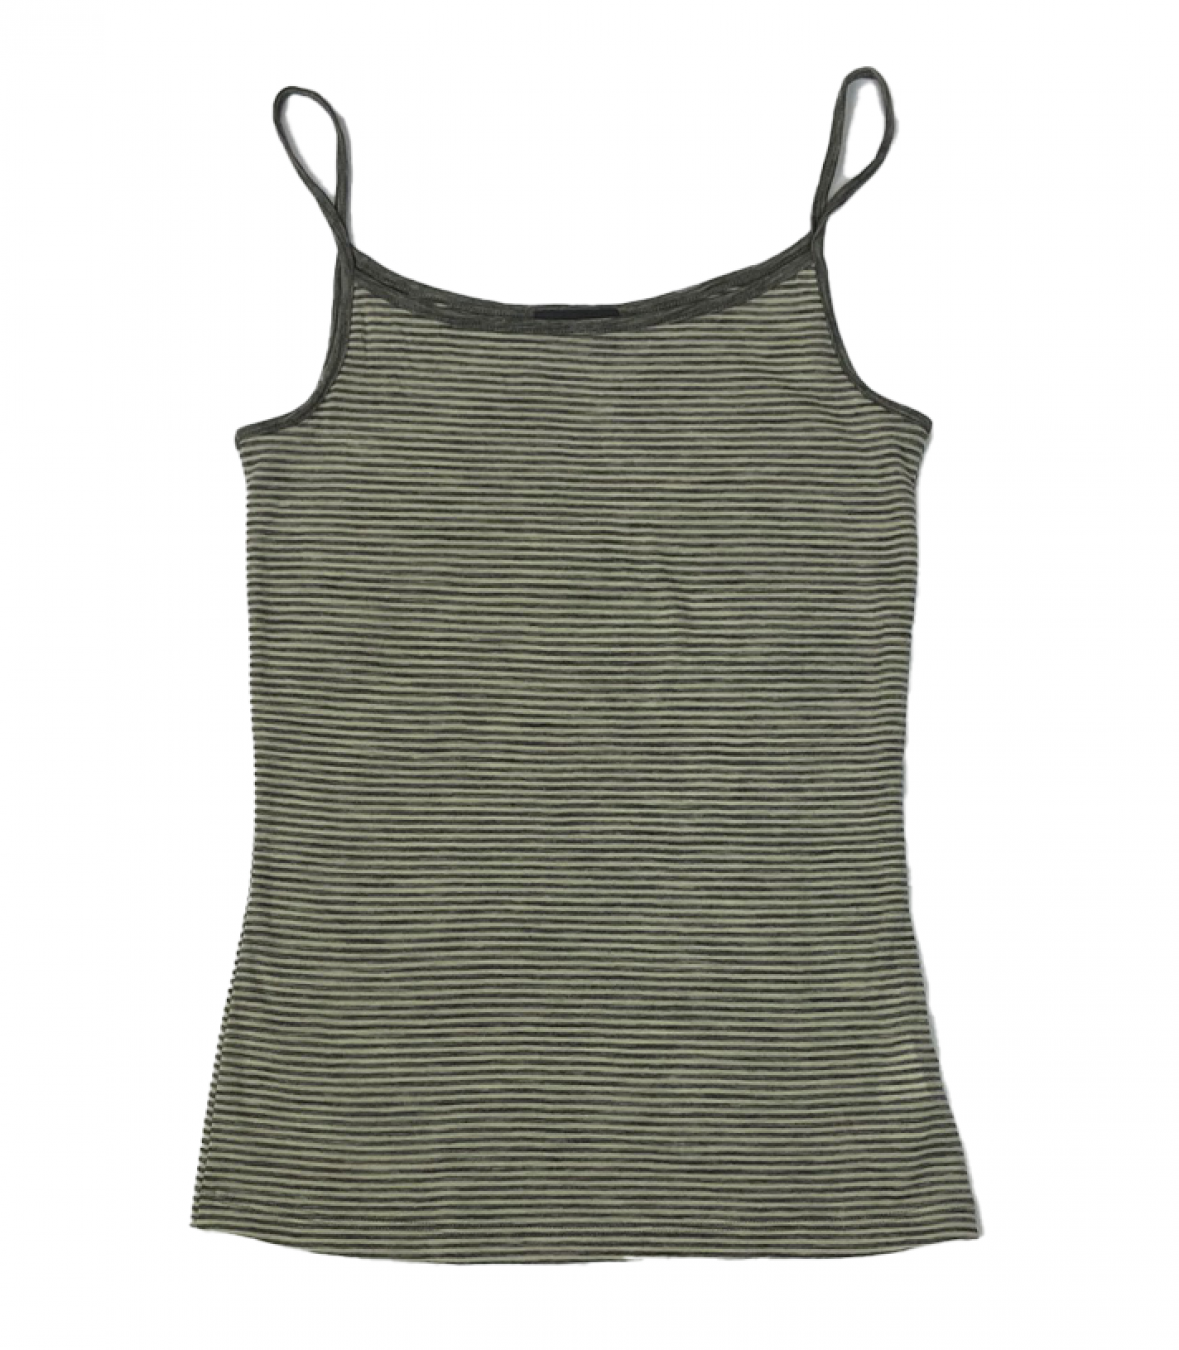 Wool Camisole - Additional Colors Made in USA | RAMBLERS WAY